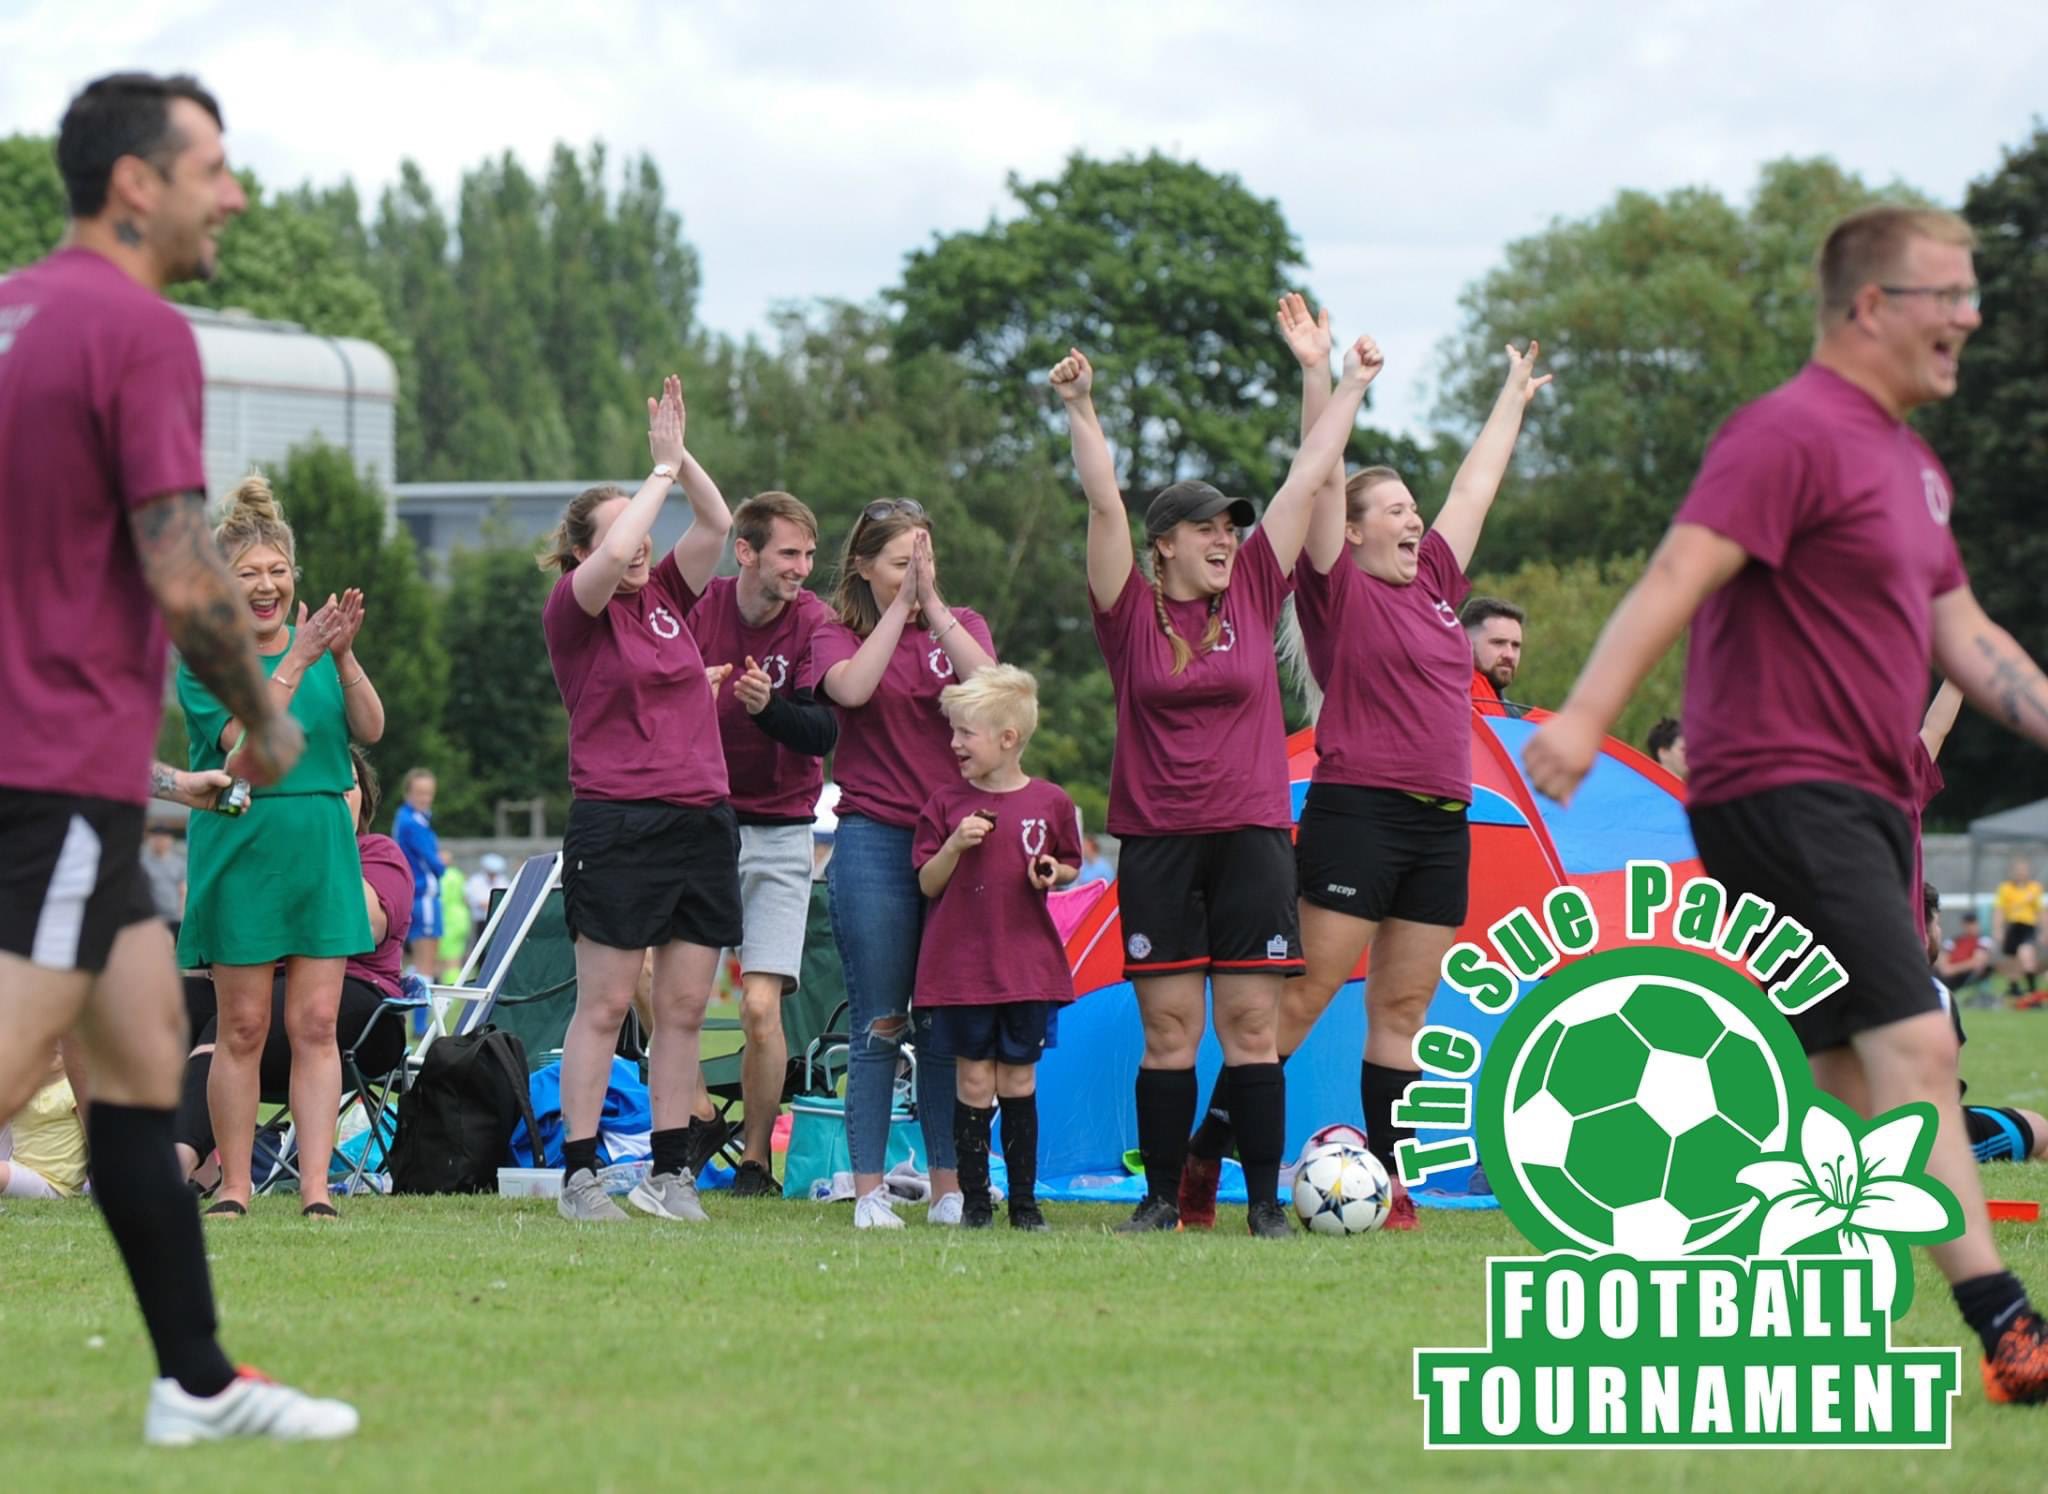 FOOTBALL | The Sue Parry Football Tournament is back